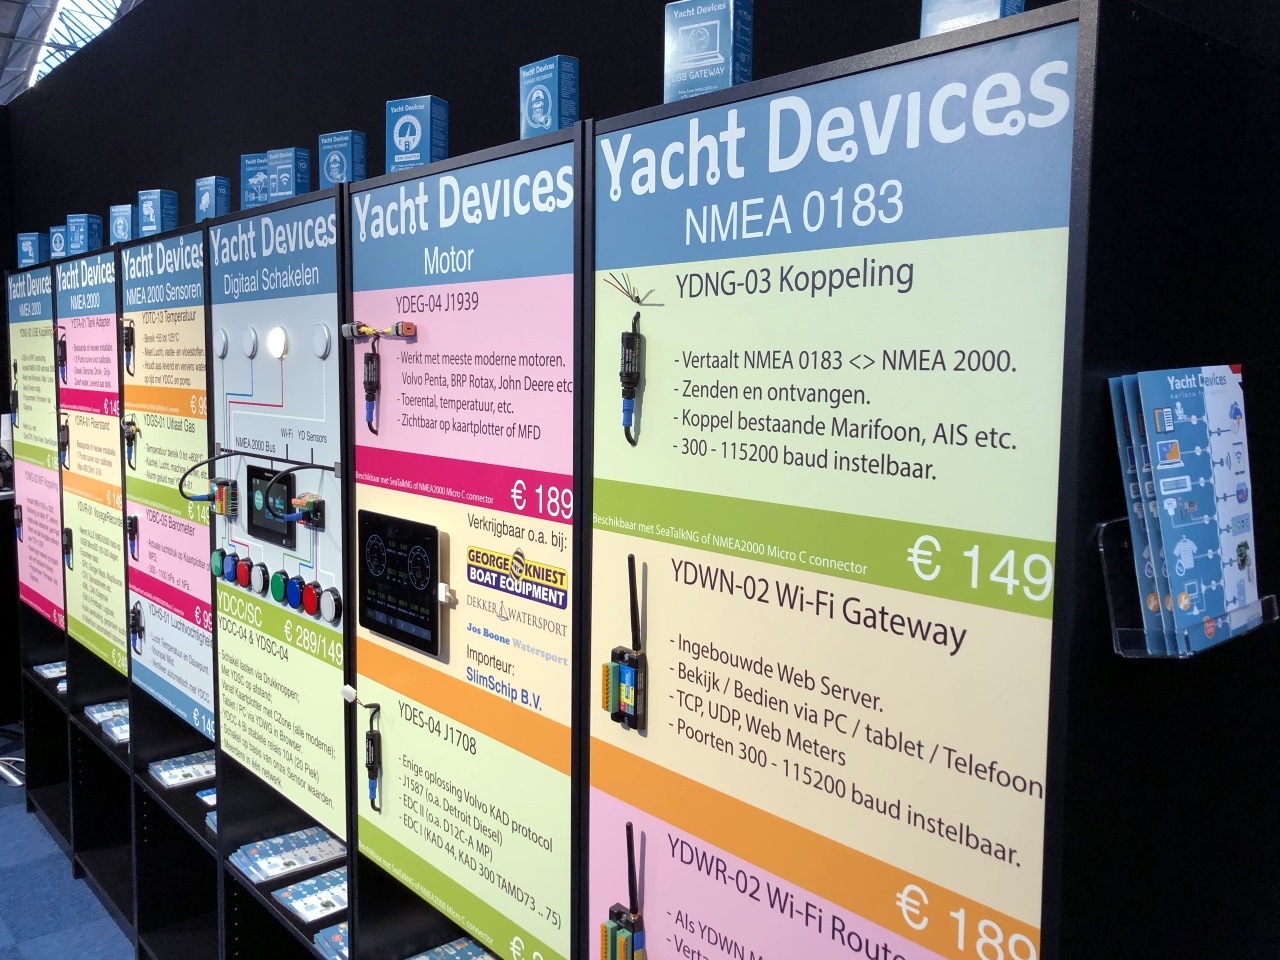 SlimSchip stand with Yacht Devices products